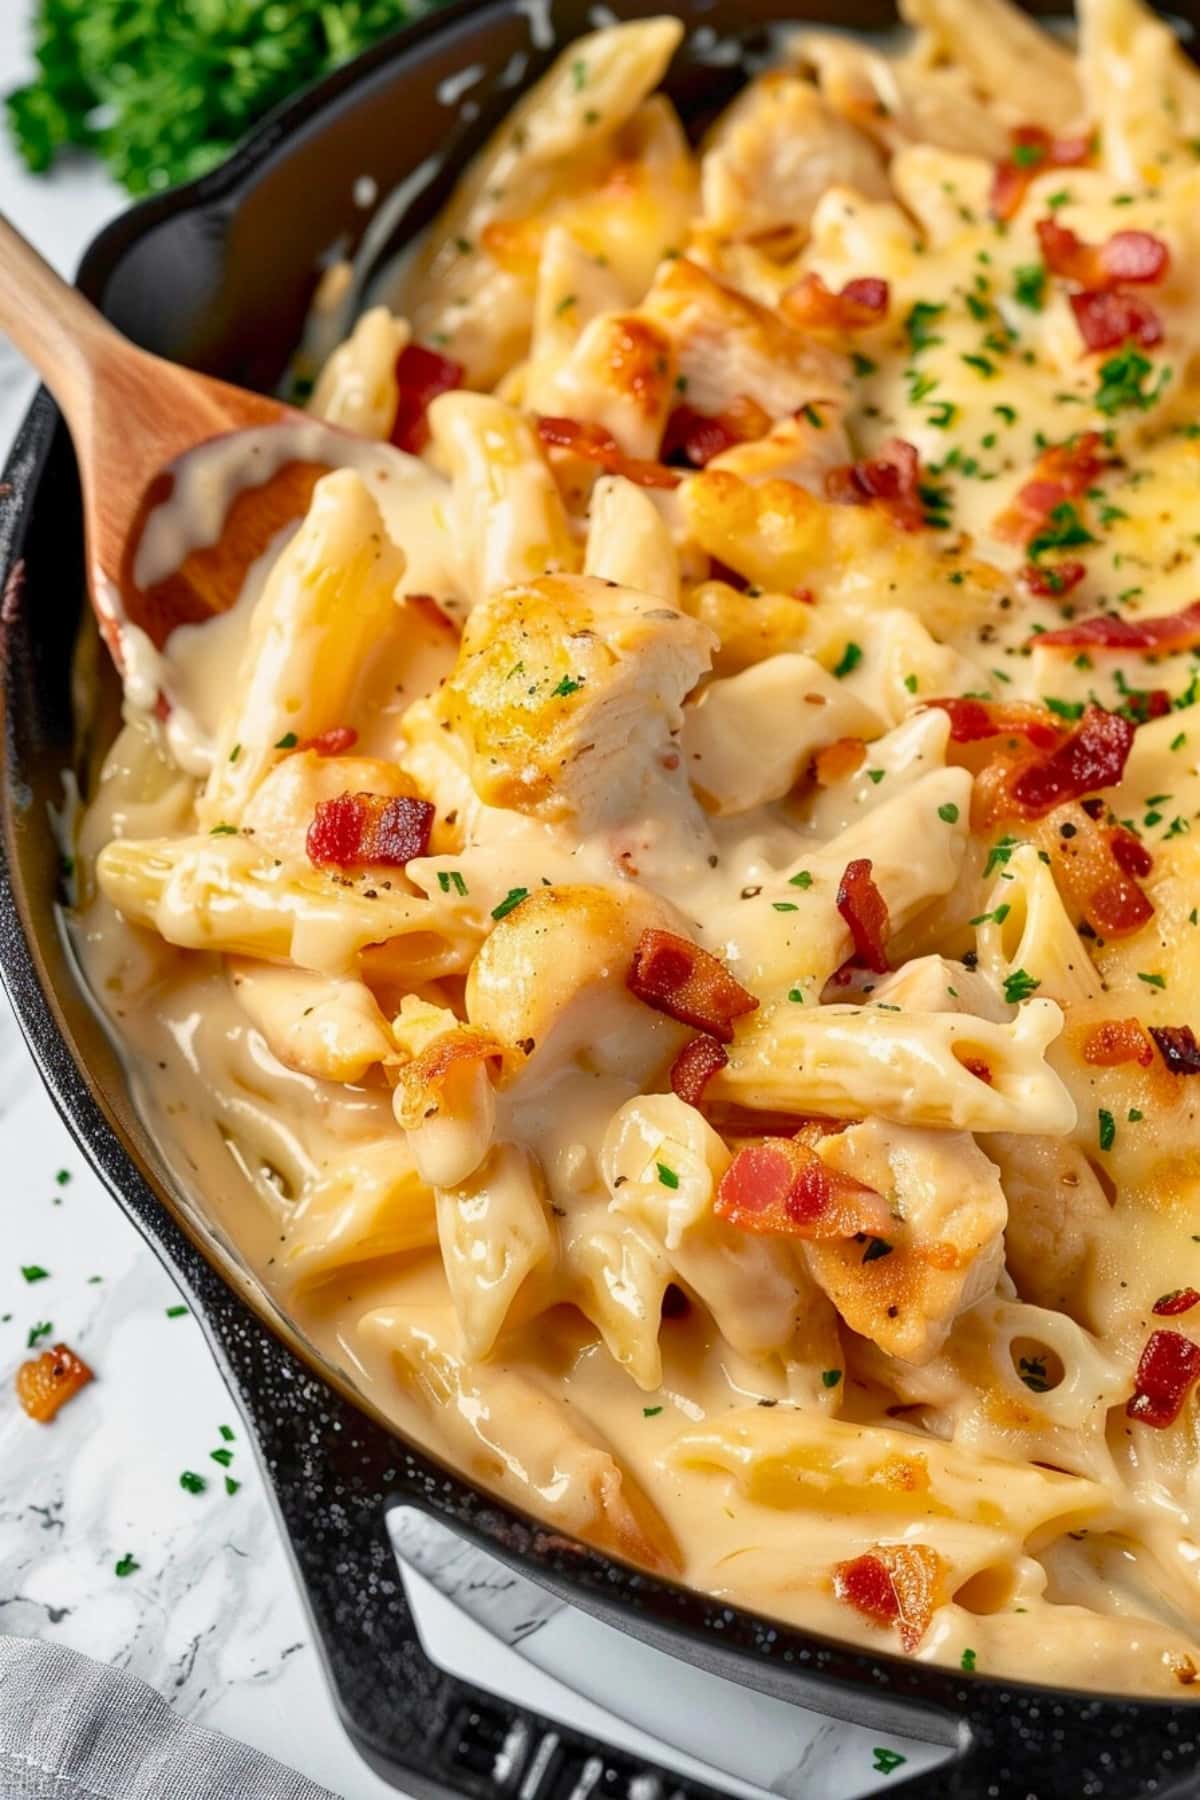 Penne pasta in cheesy and creamy sauce, bacon and chicken, tossed in a cast iron skillet with a wooden ladle.